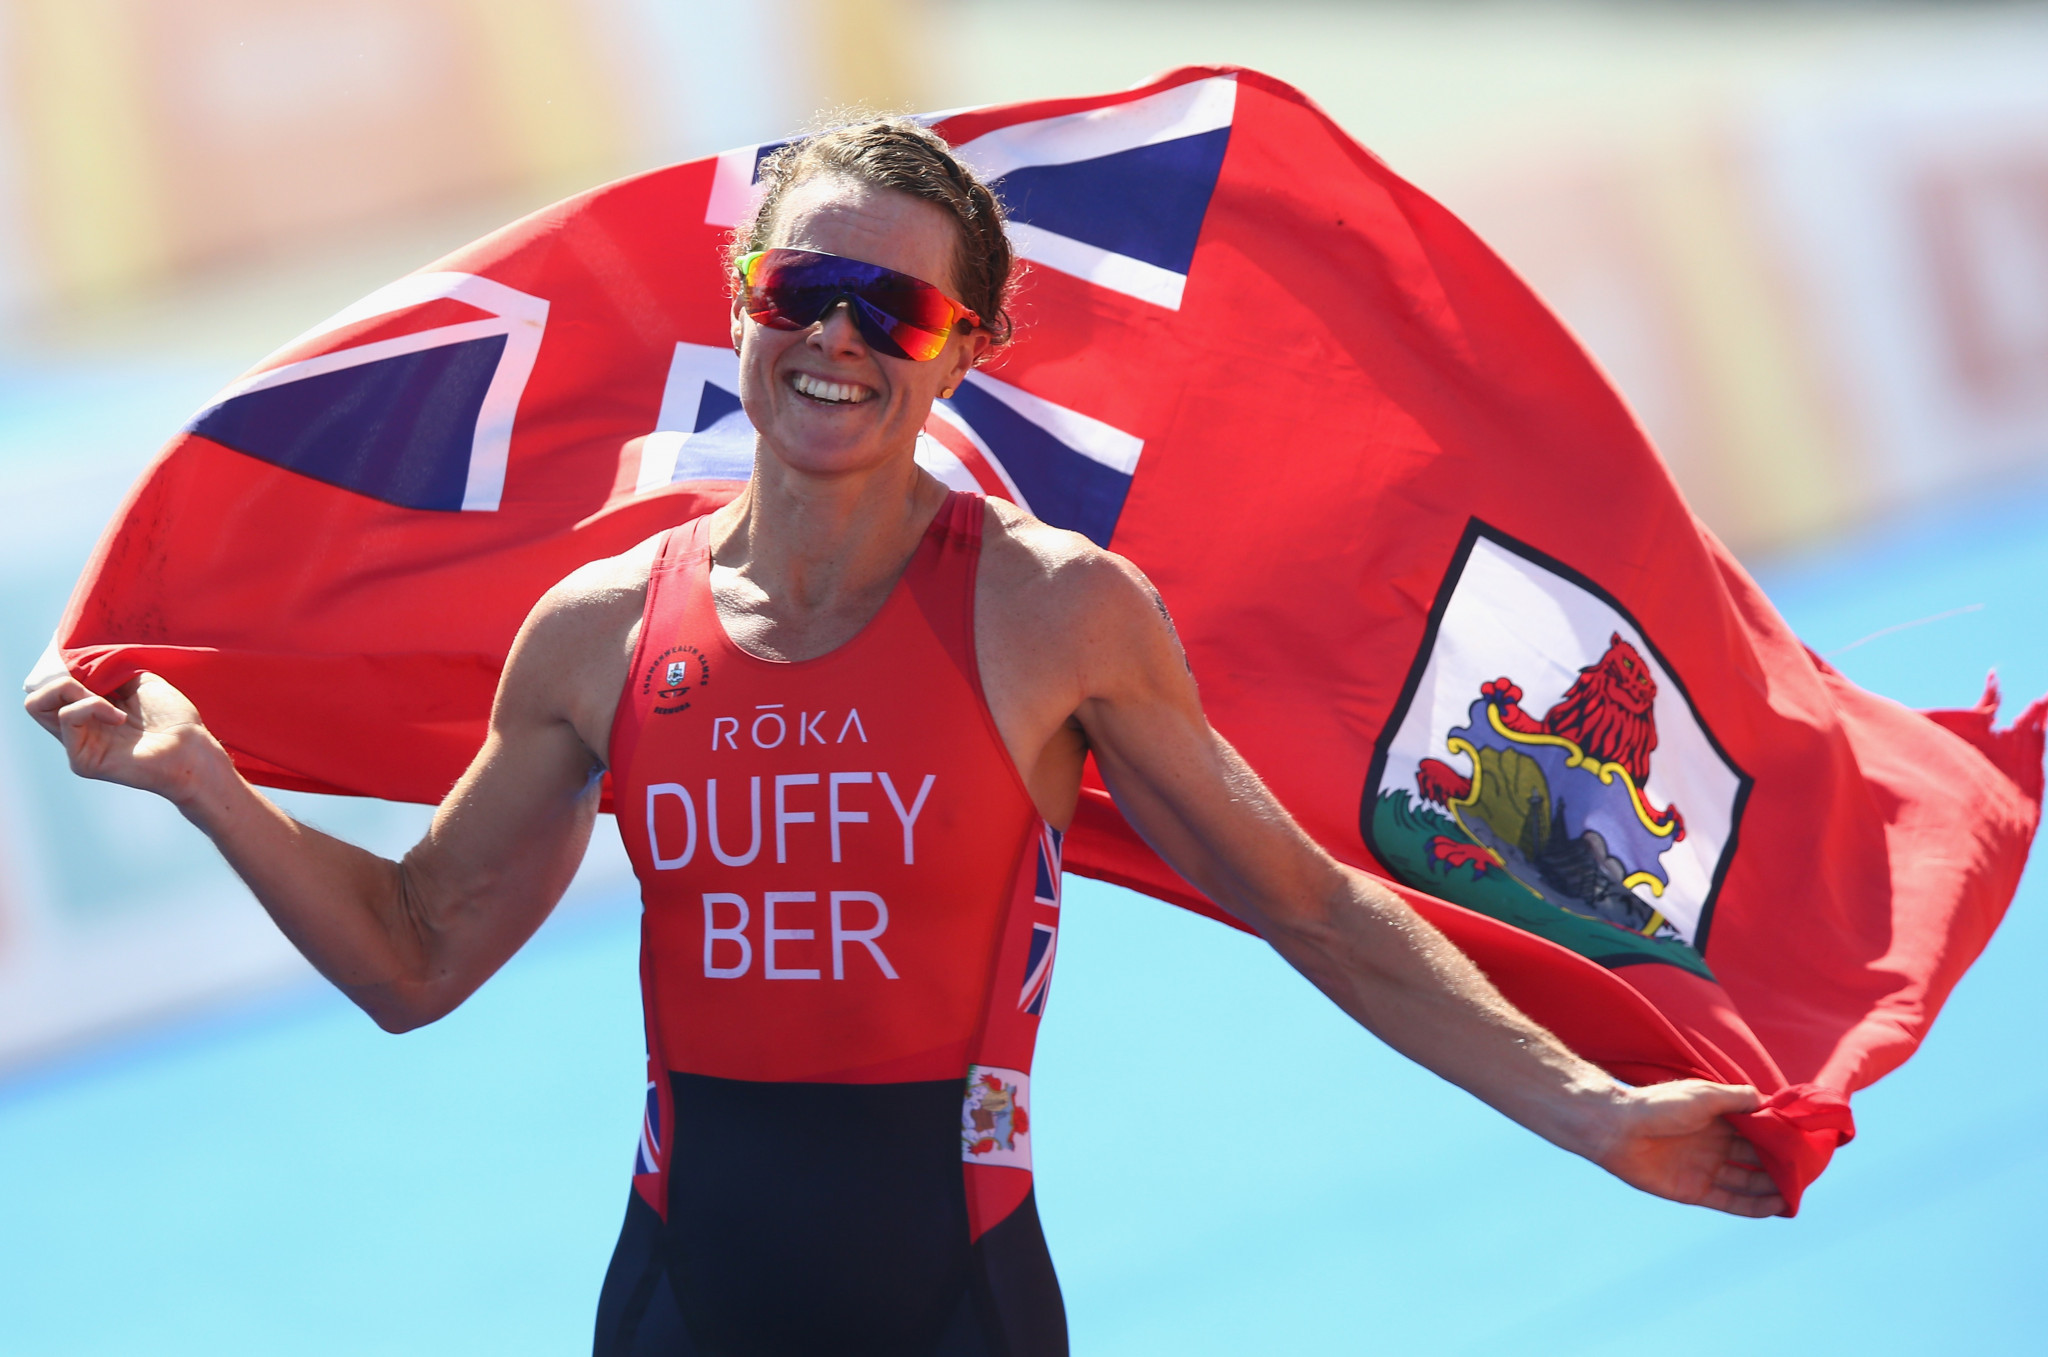 Flora Duffy won Bermuda's second Commonwealth Games gold medal, taking victory in the triathlon at Gold Coast 2018 ©Getty Images